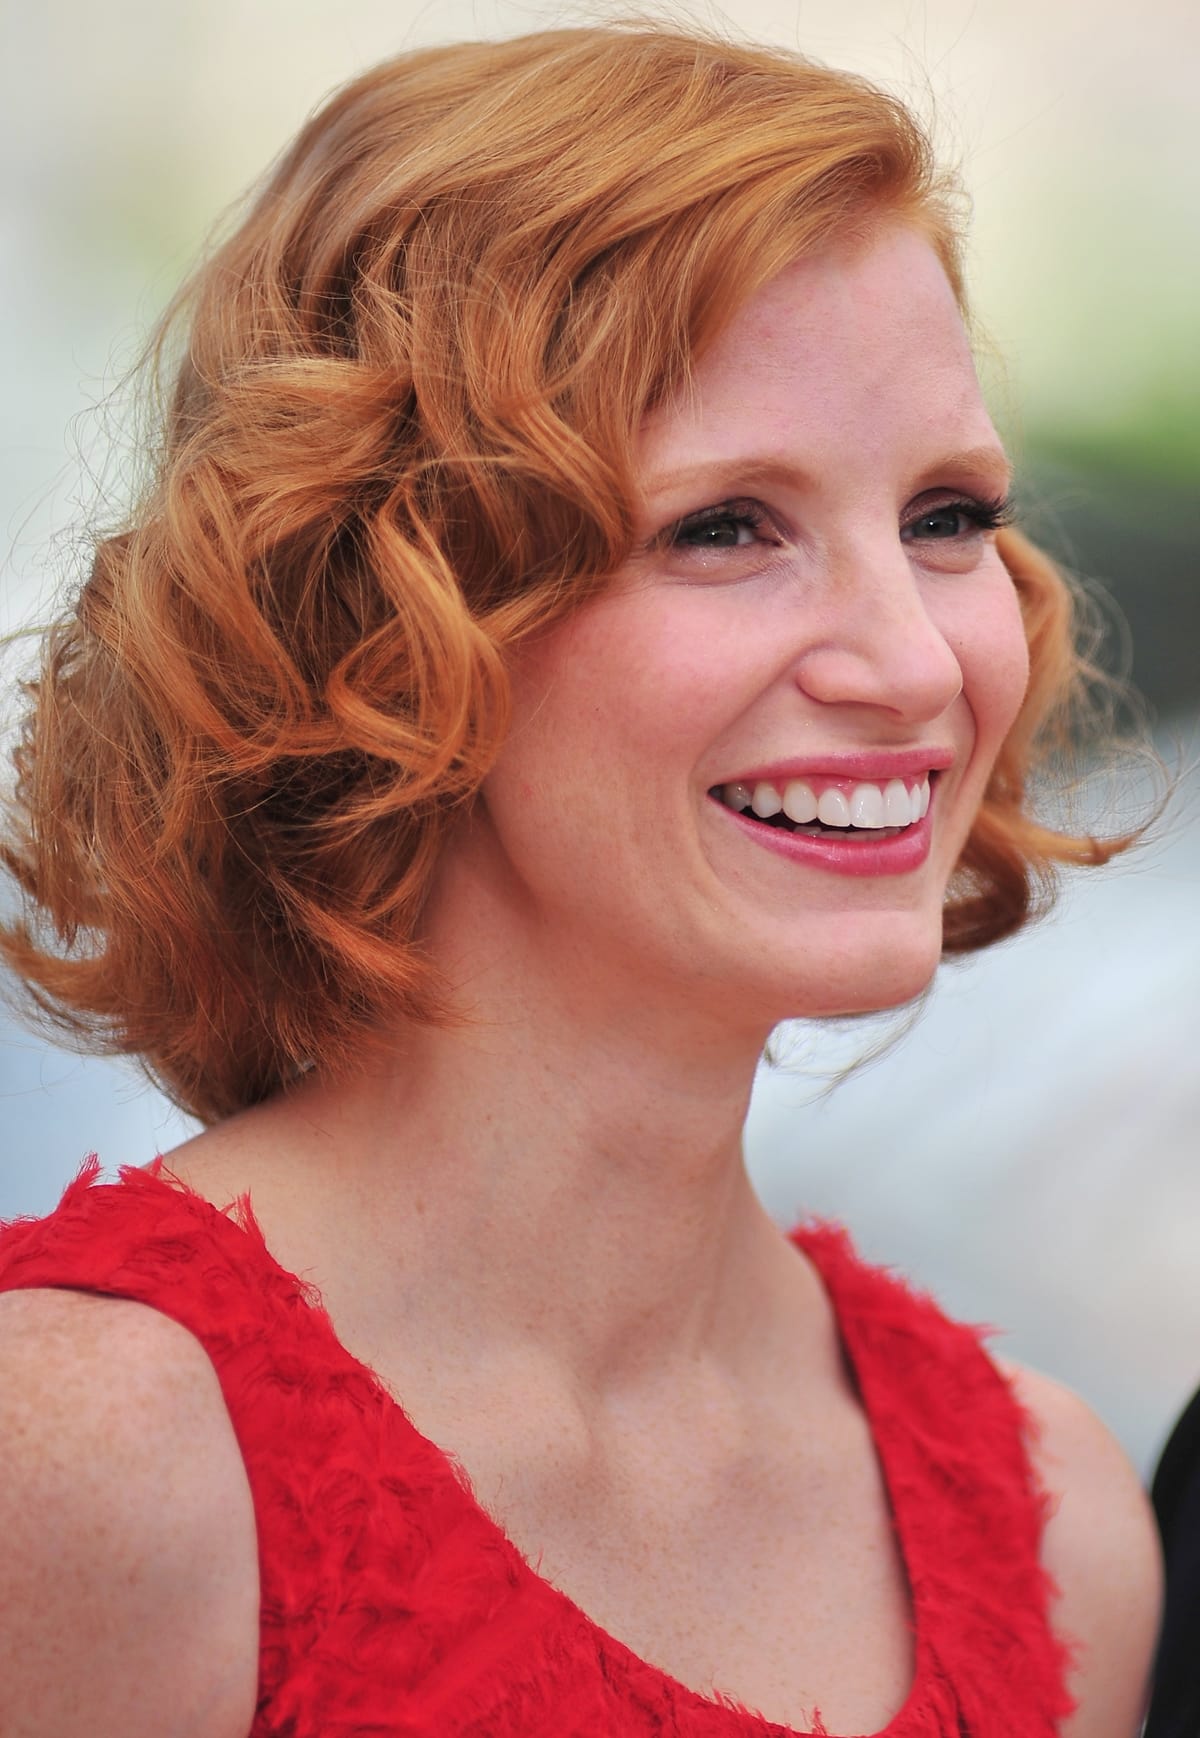 Jessica Chastain was bullied for having red hair and freckles when growing up